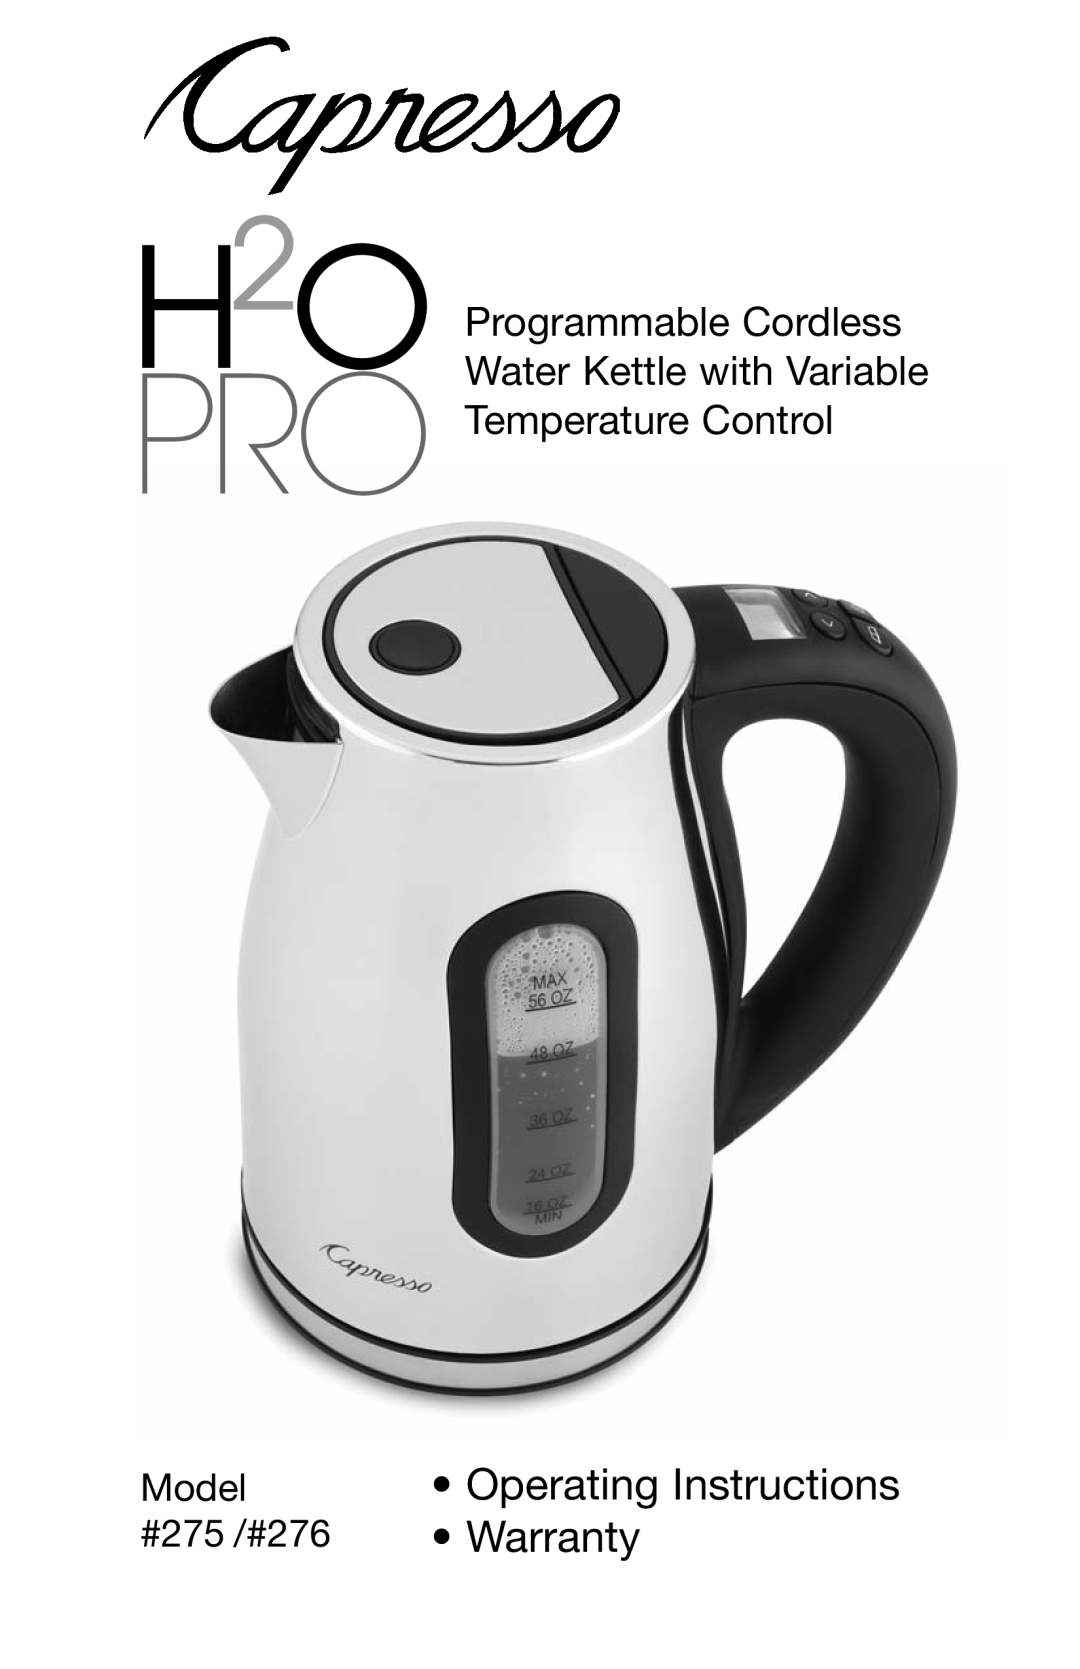 Capresso operating instructions Programmable Cordless Water Kettle with Variable Temperature Control, Model #275 /#276 